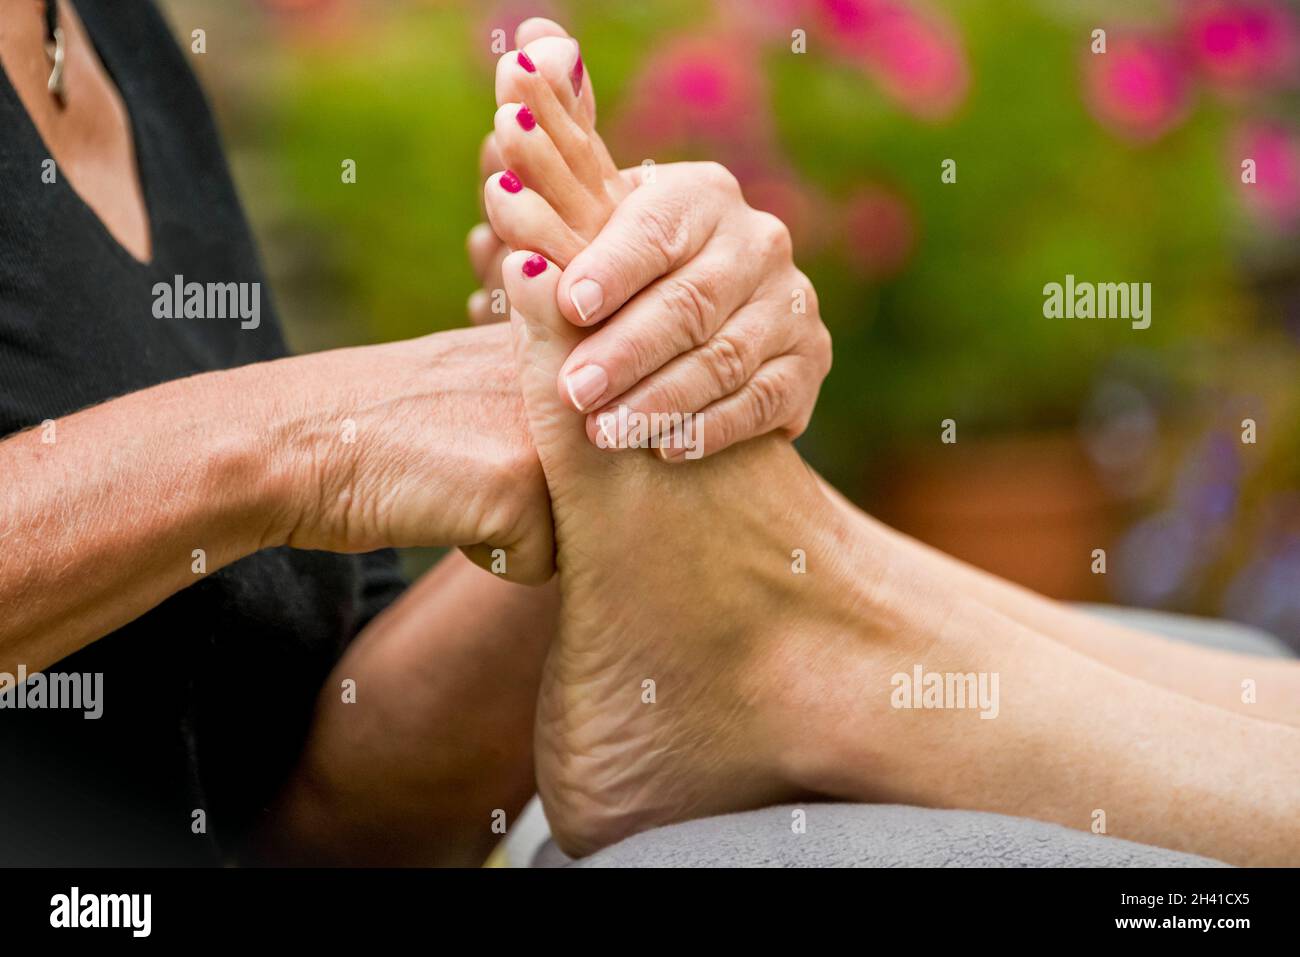 Horizontal close up of a reflexologist applying pressure to the sole of a foot during a treatment. Stock Photo